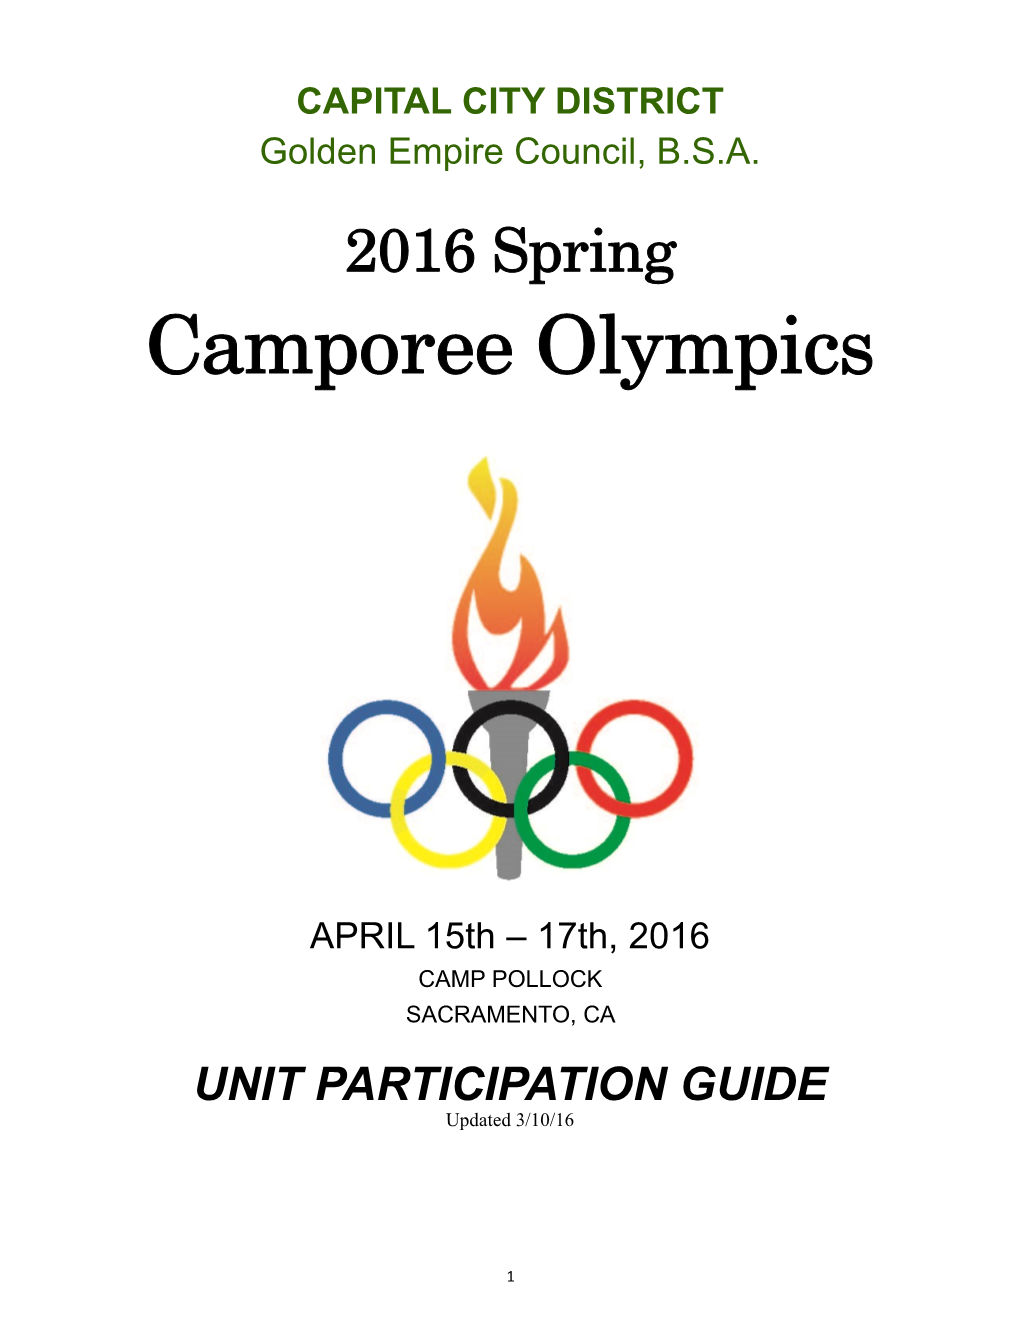 What Are the Scout Camporee Olympics?